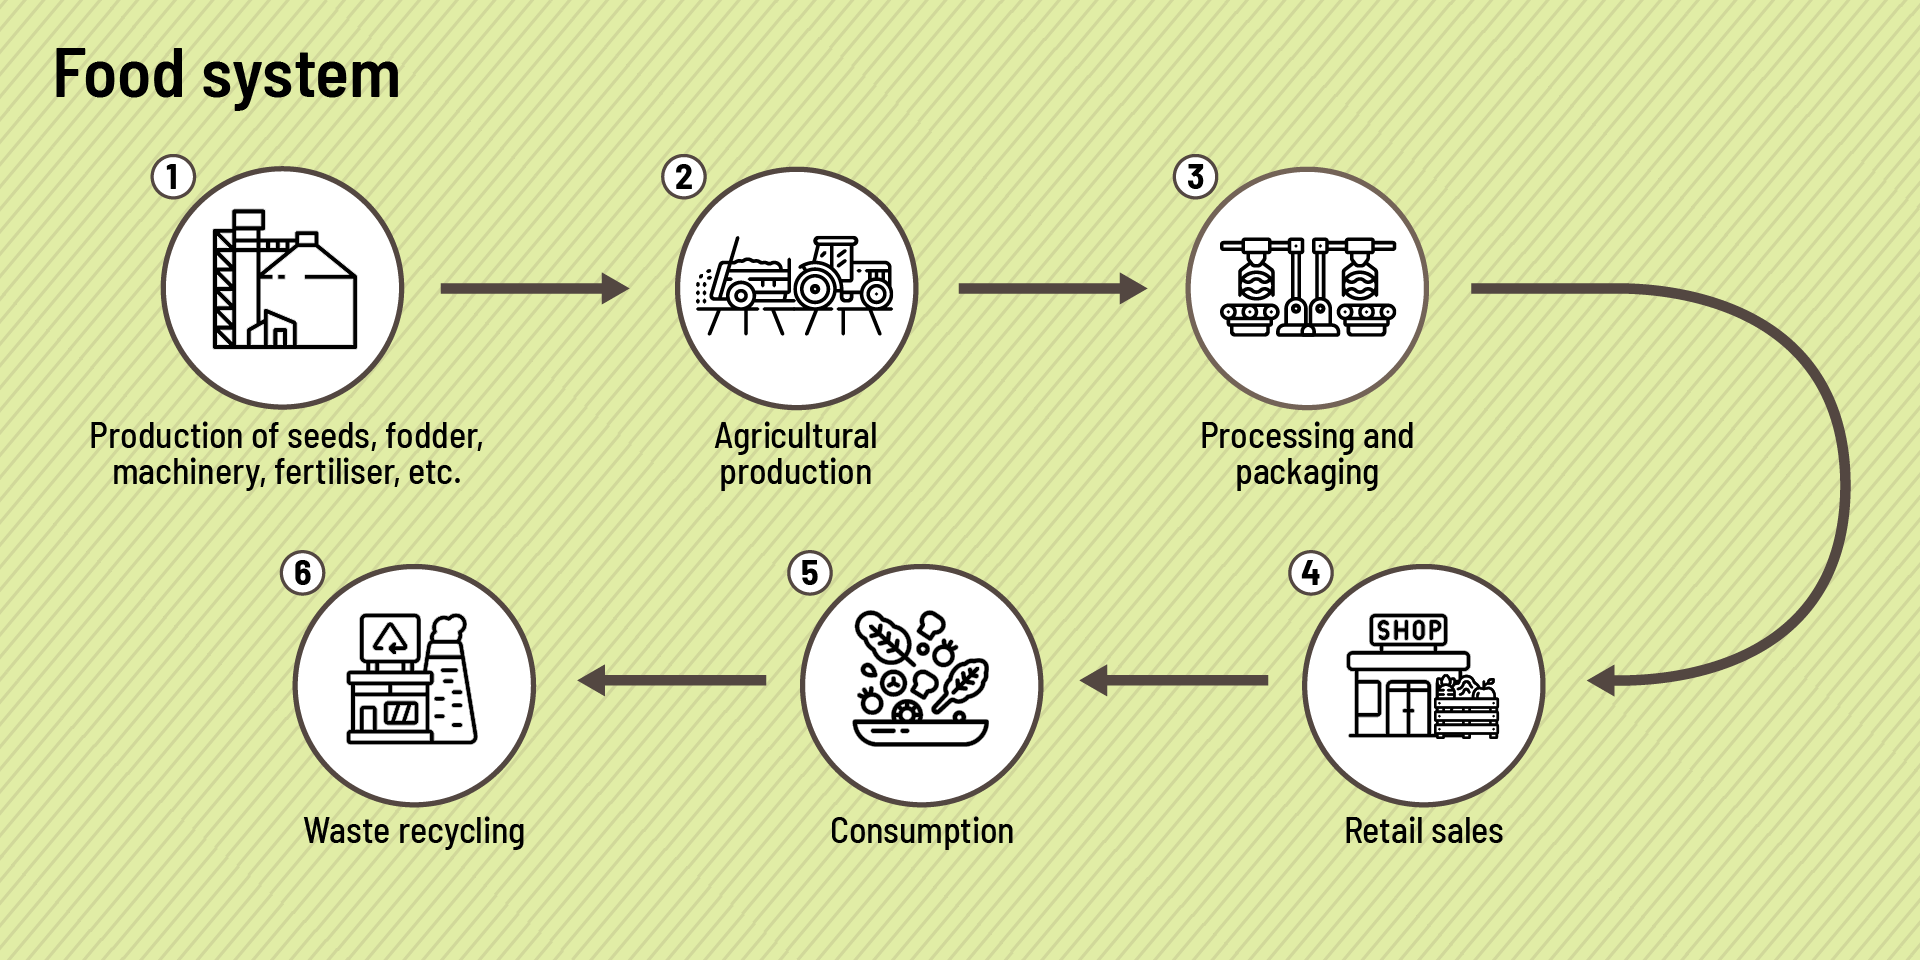 Diagram showing a food system from seed and fodder production to agricultural production to processing and packaging to retail sales to consumption to waste recycling.